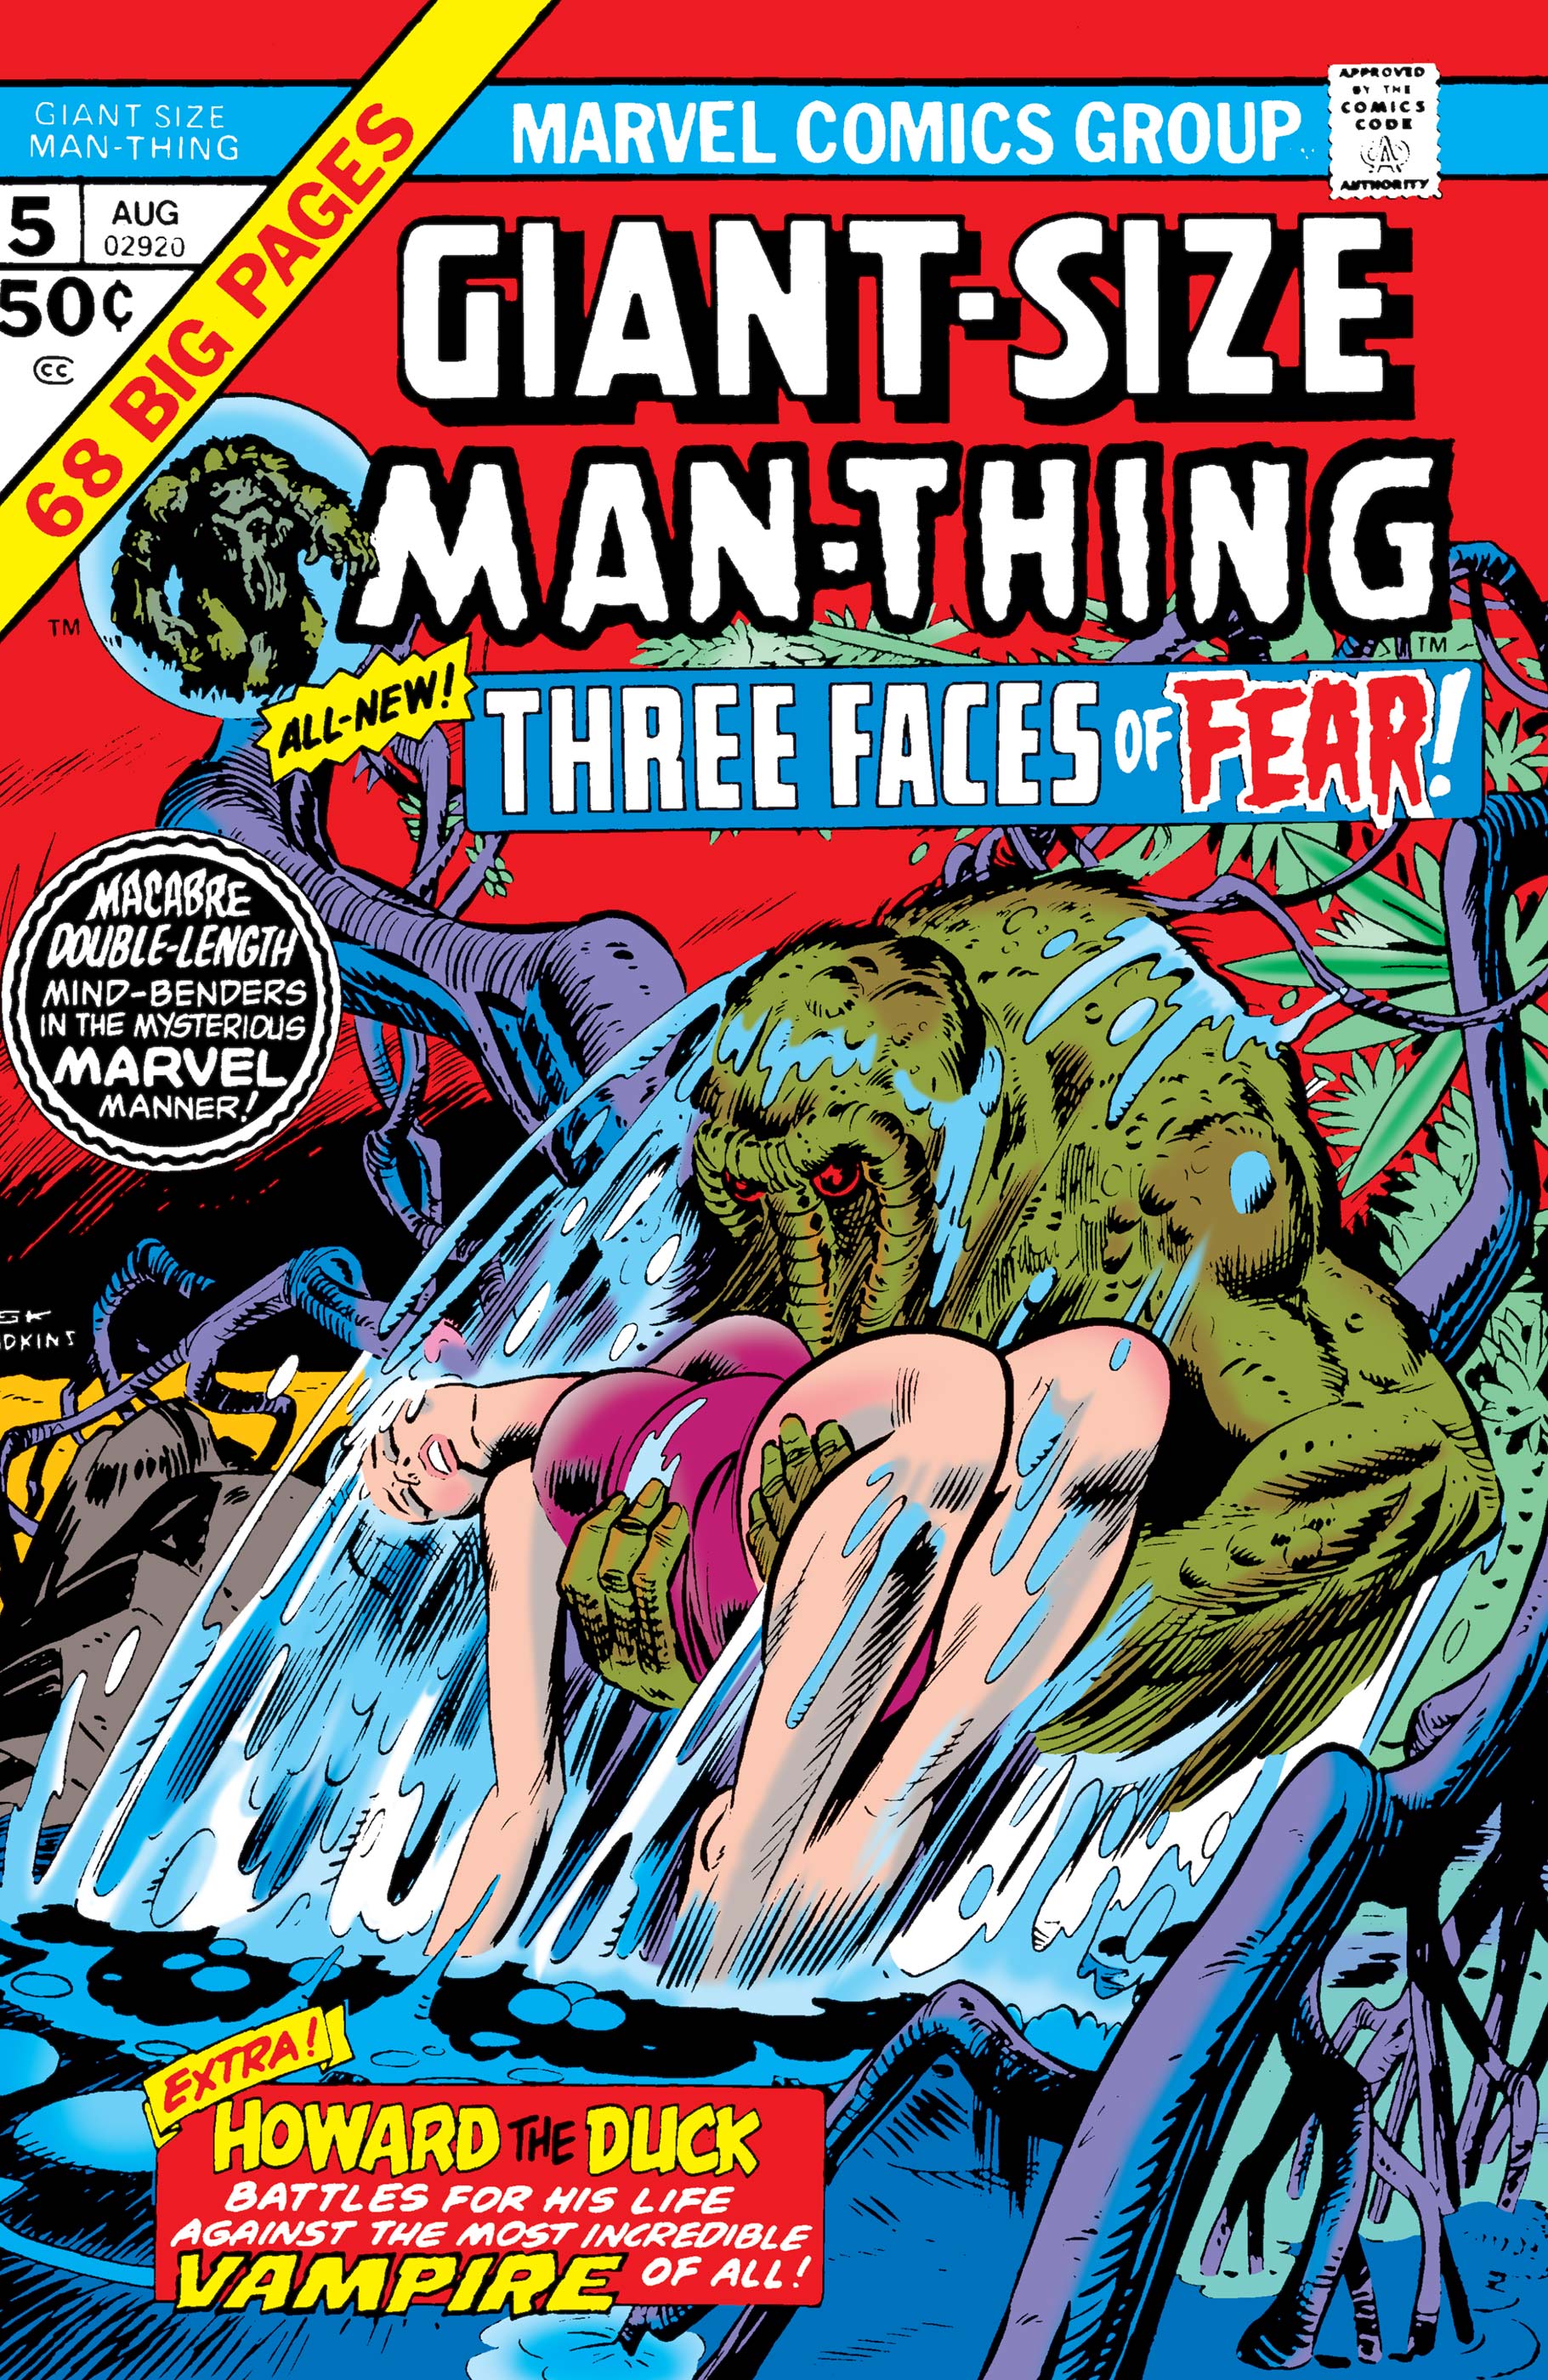 Giant-Size Man-Thing (1974) #5